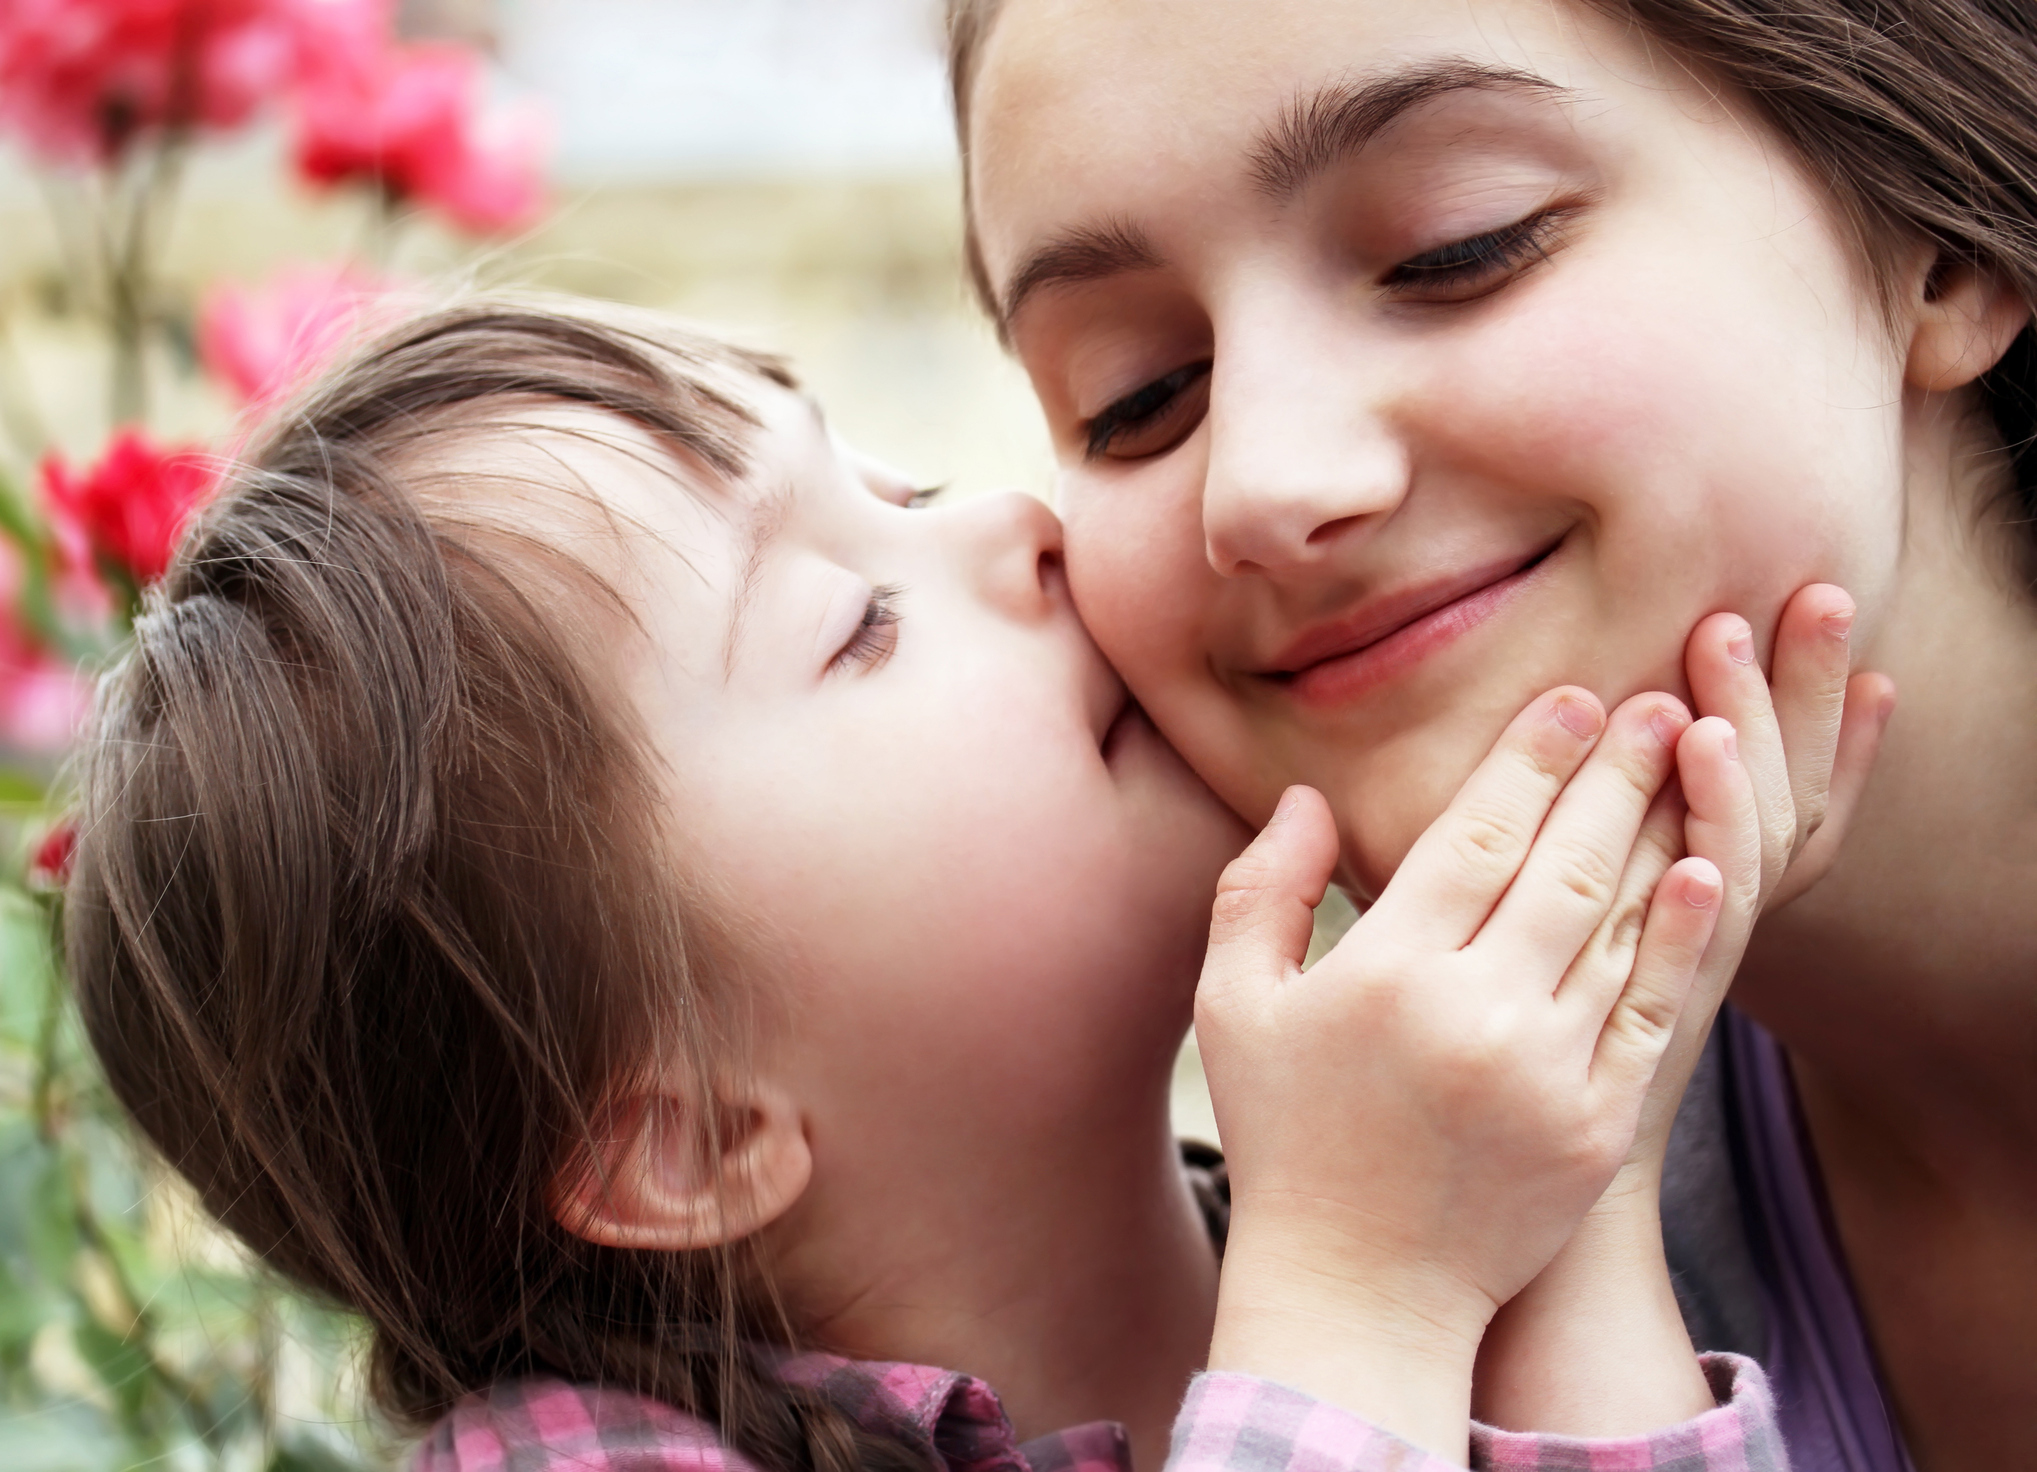 Child with Down Syndrome kissing the cheek of an adult.